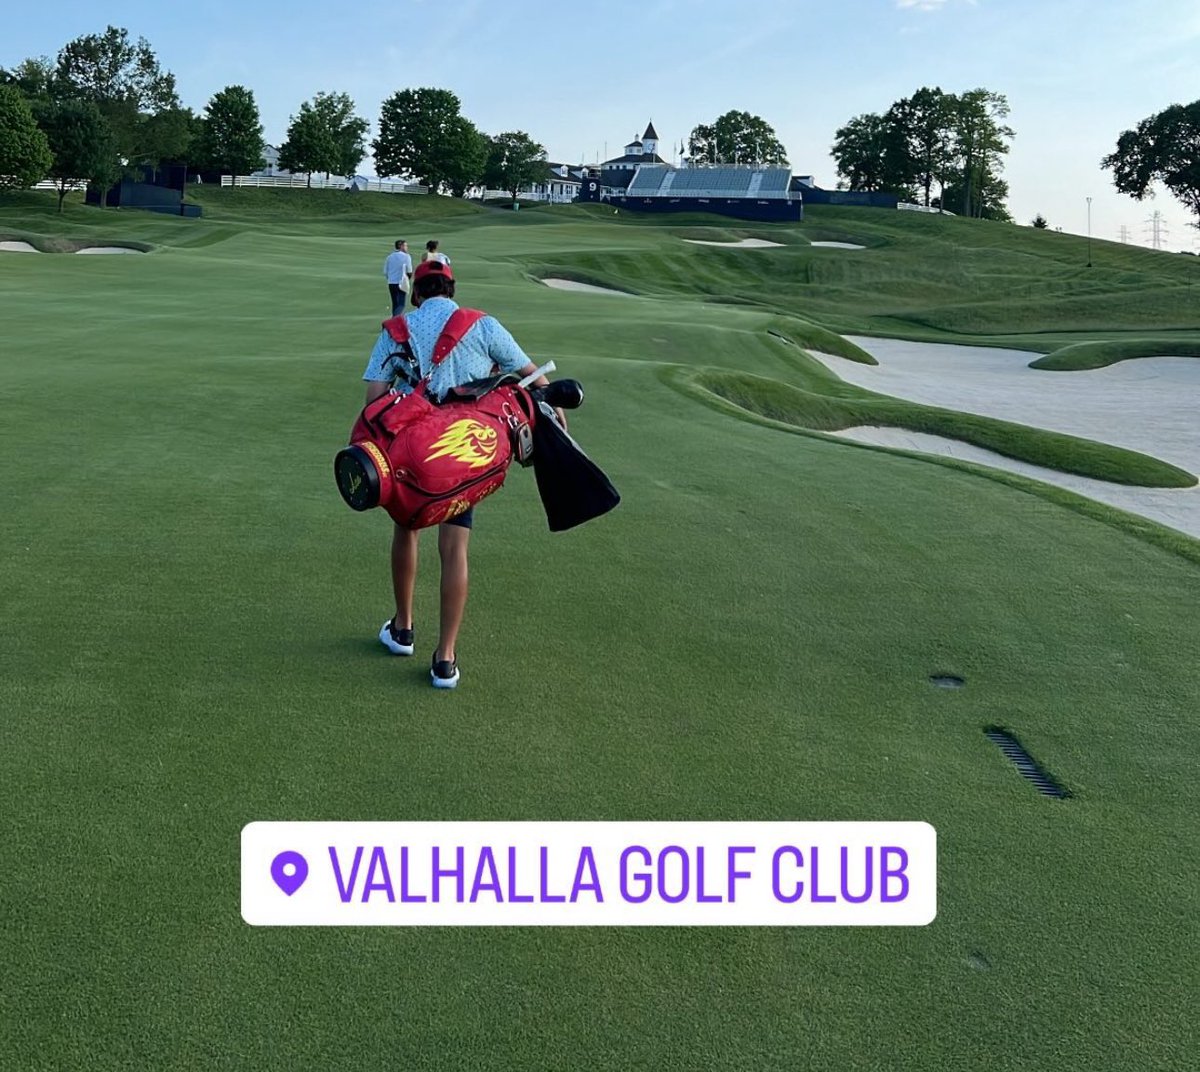 David Puig is already on site at Valhalla getting a late evening practice round in tonight via his IG story, Super pumped to see how he plays this upcoming week 👍🏼